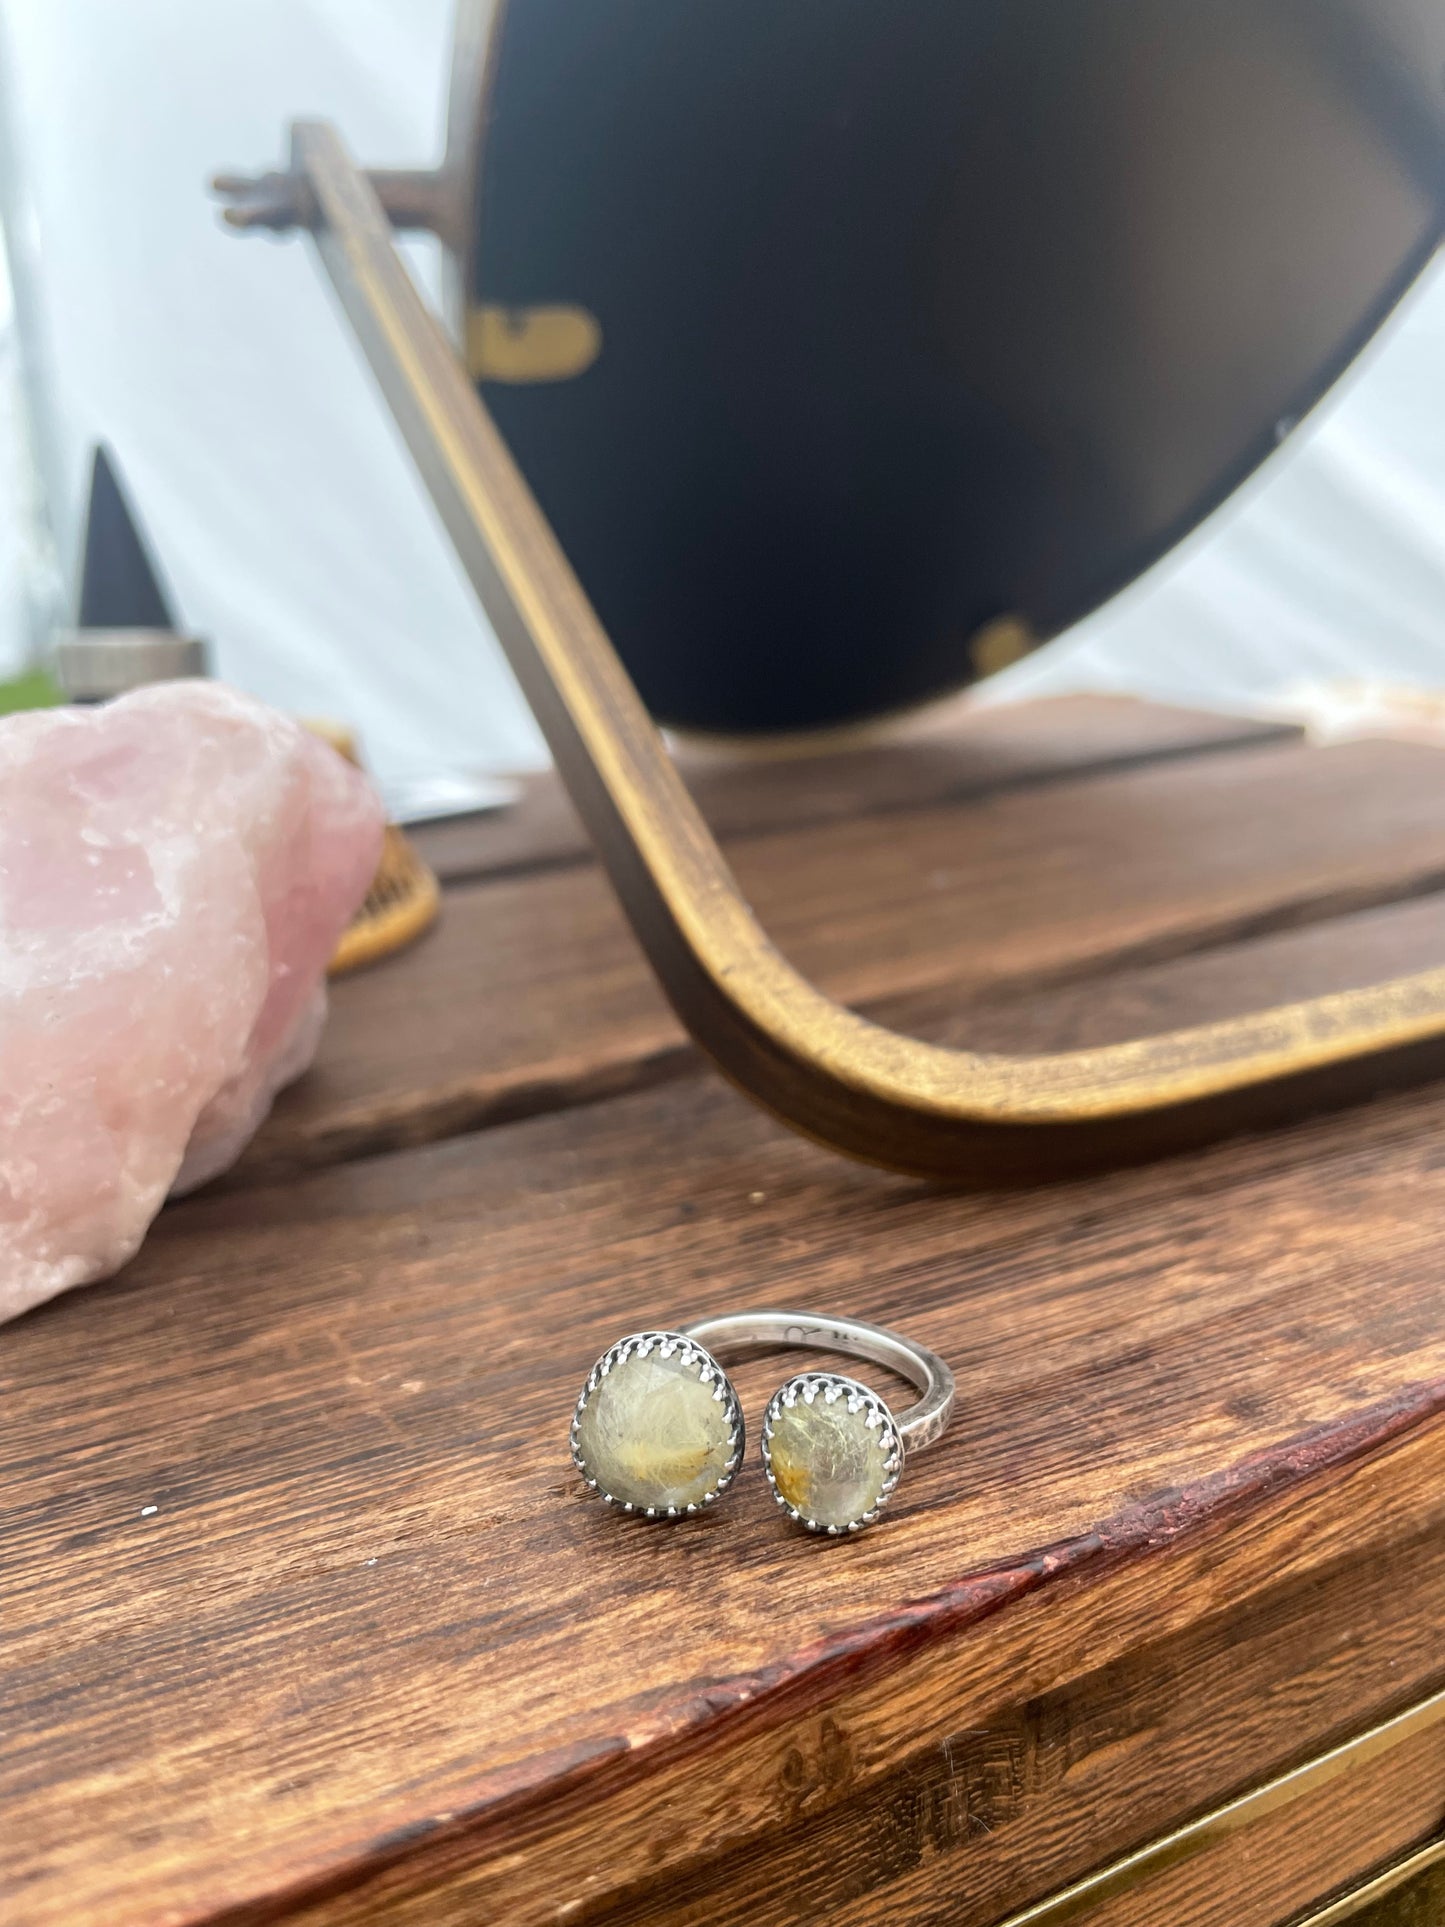 Faceted Rutilated Quartz and Sterling Doublet Ring - US 9